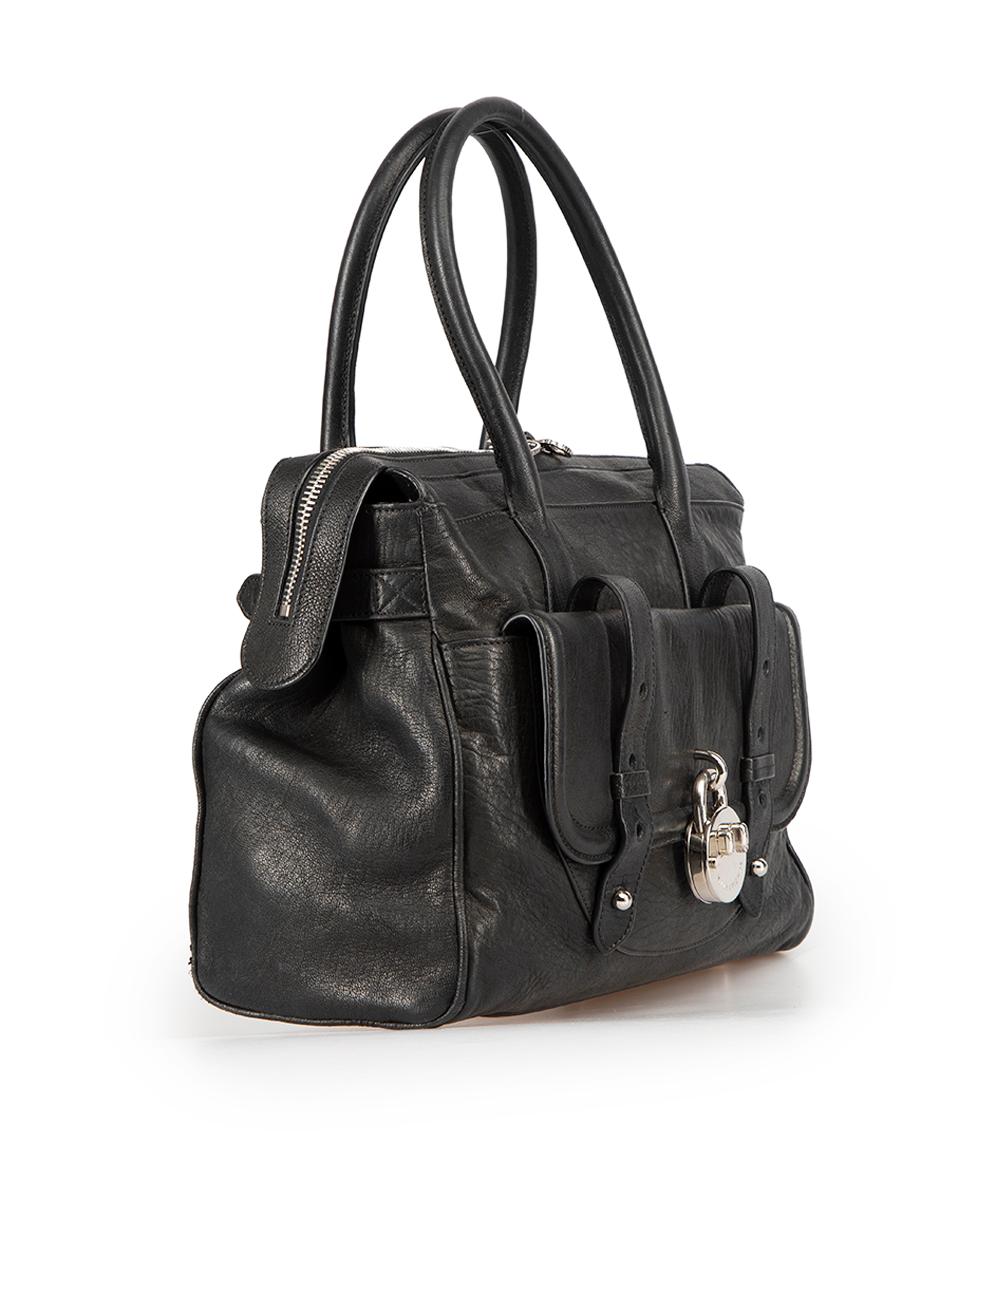 CONDITION is Very good. Minimal wear to bag is evident. Minimal wear to the front and base corners with light abrasions to the leather. The padlock also has light tarnishing on this used Hill & Friends designer resale item. This item comes with